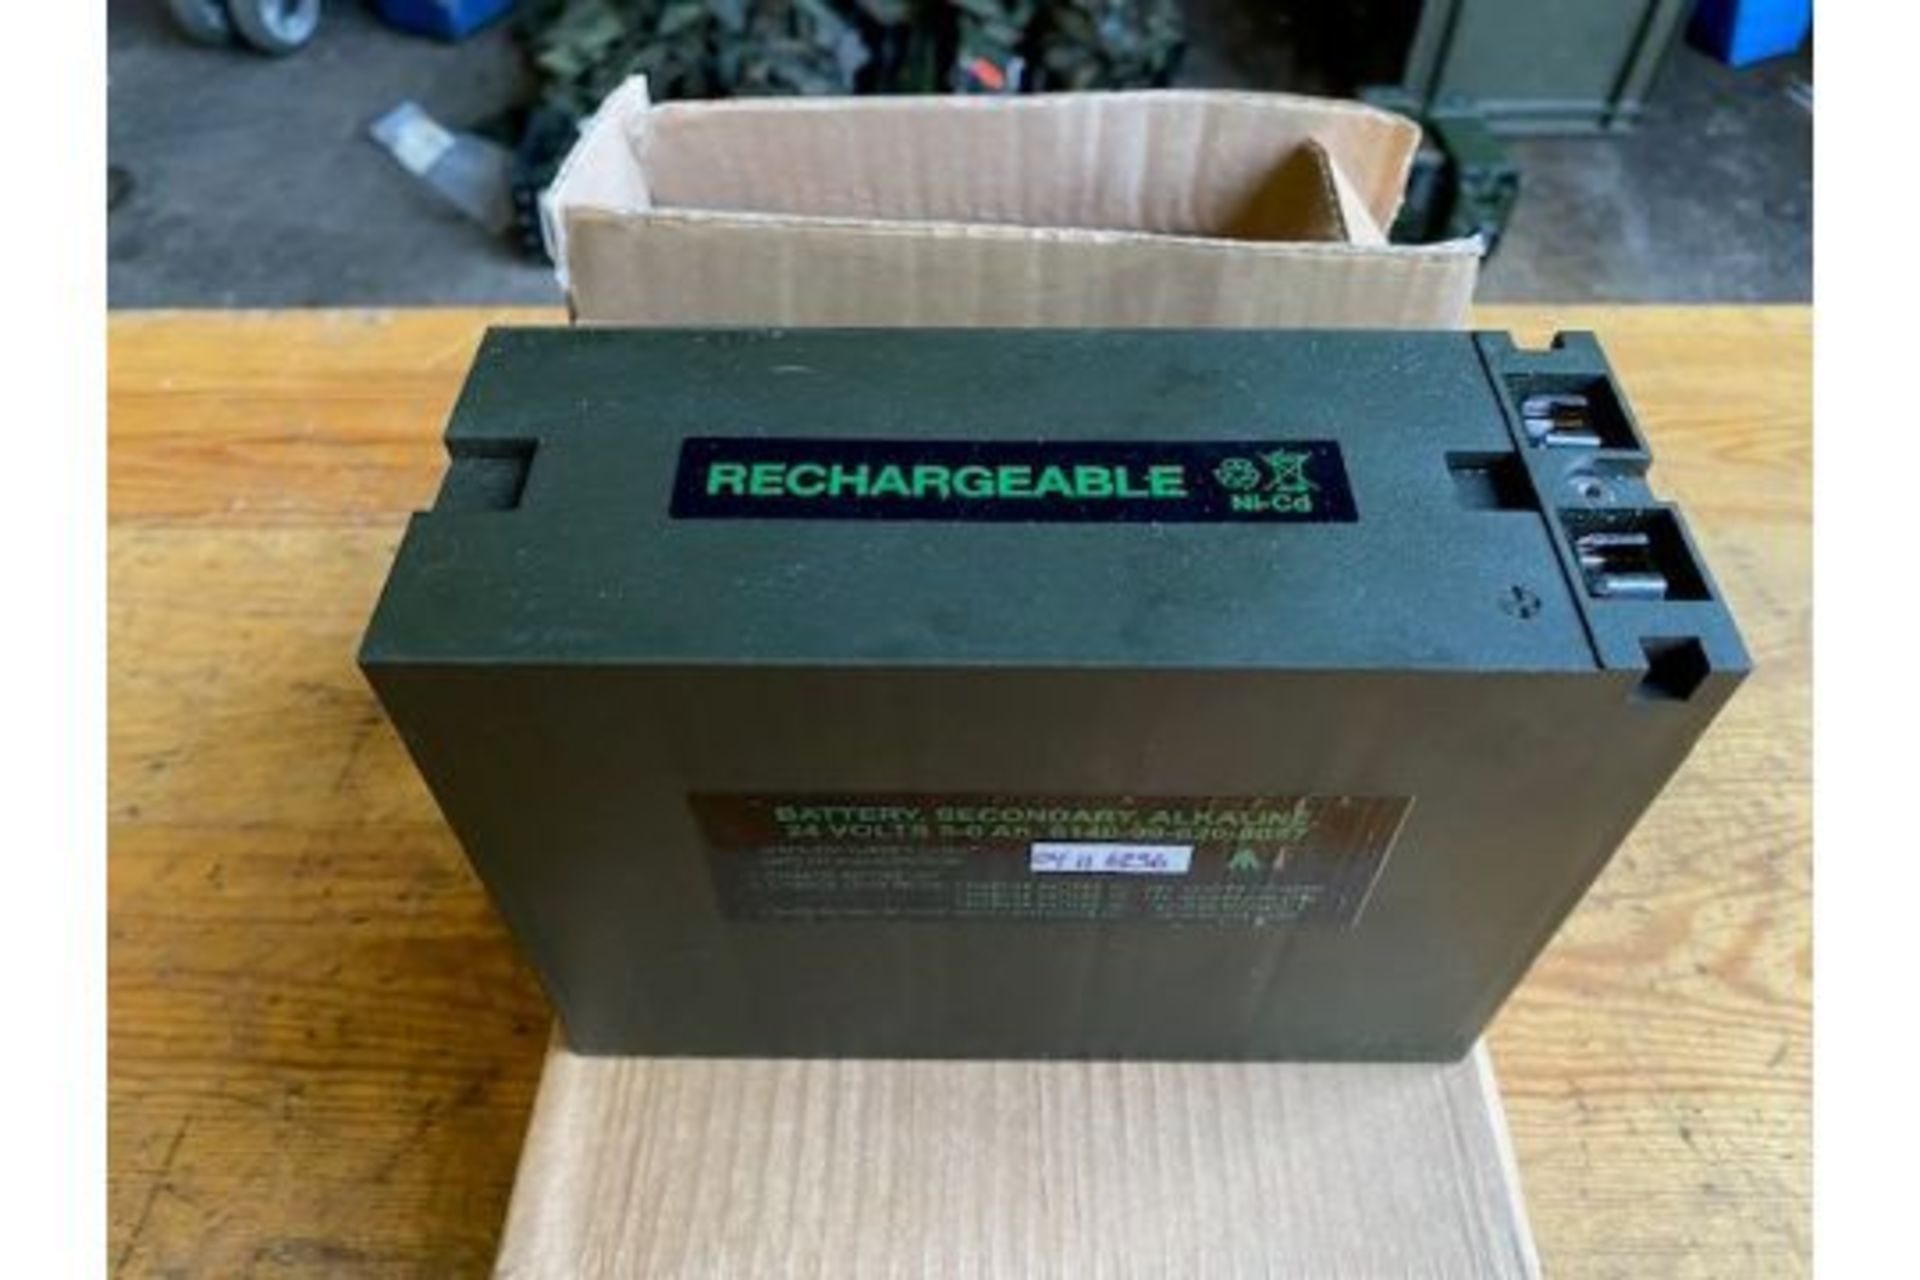 2 x New Unissued Clansman 24 Volt Rechargeable Radio Battery - Image 4 of 5